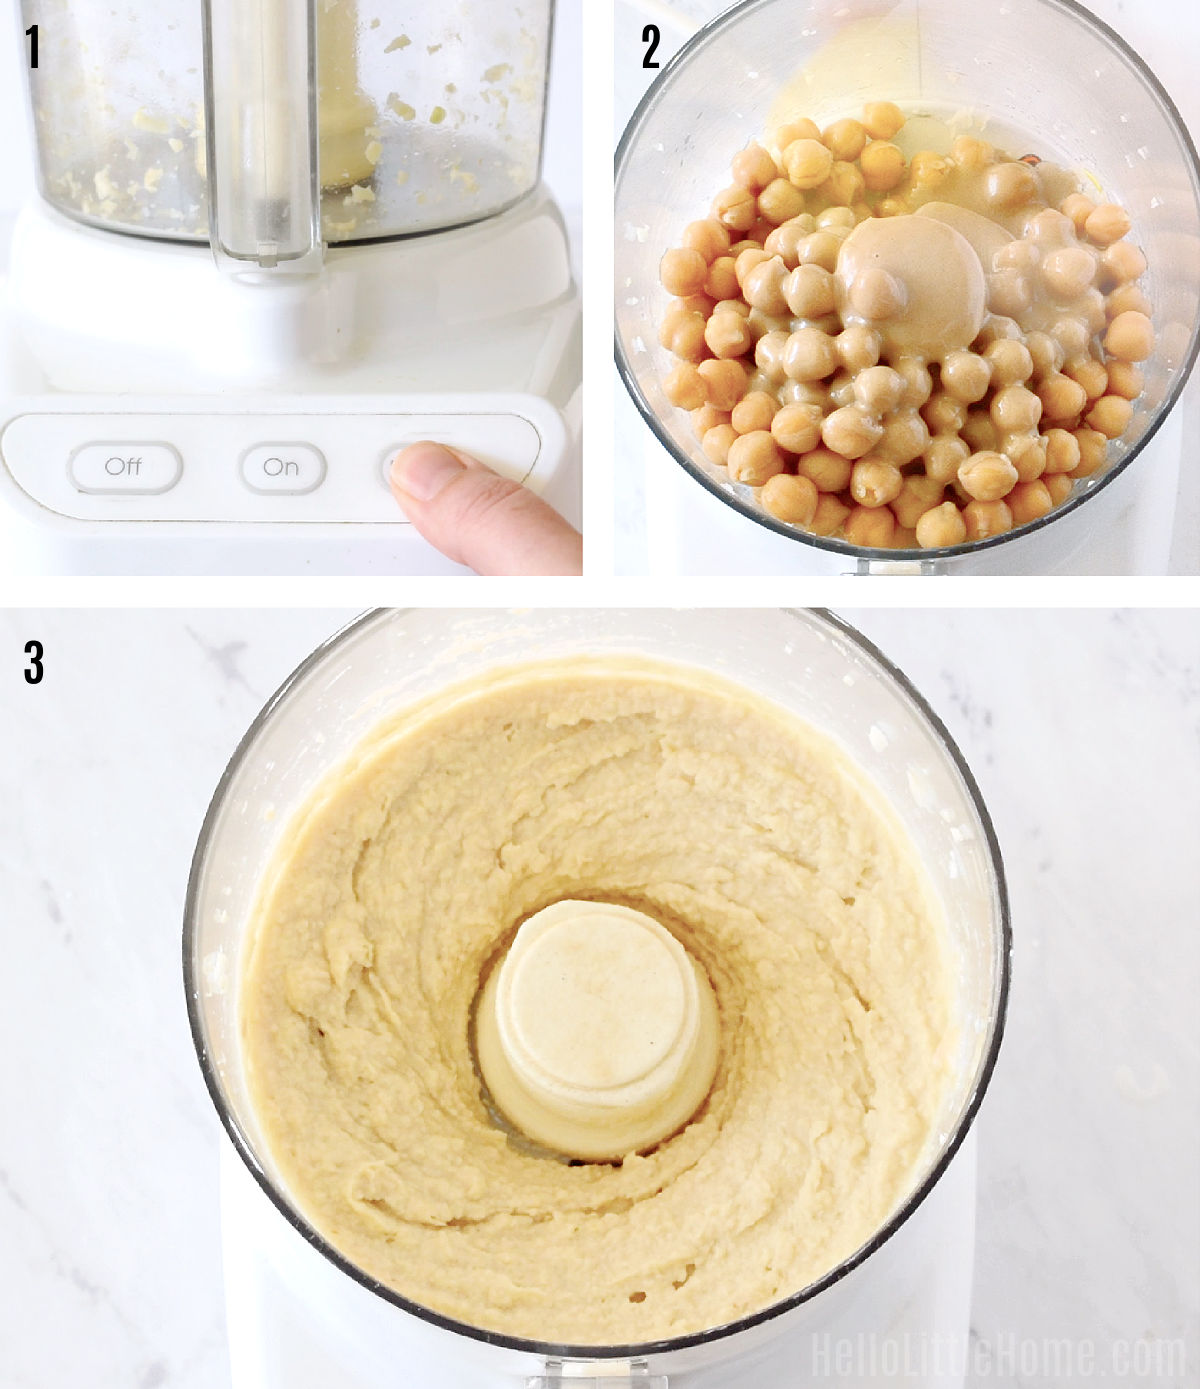 A photo collage showing how to make hummus step by step.